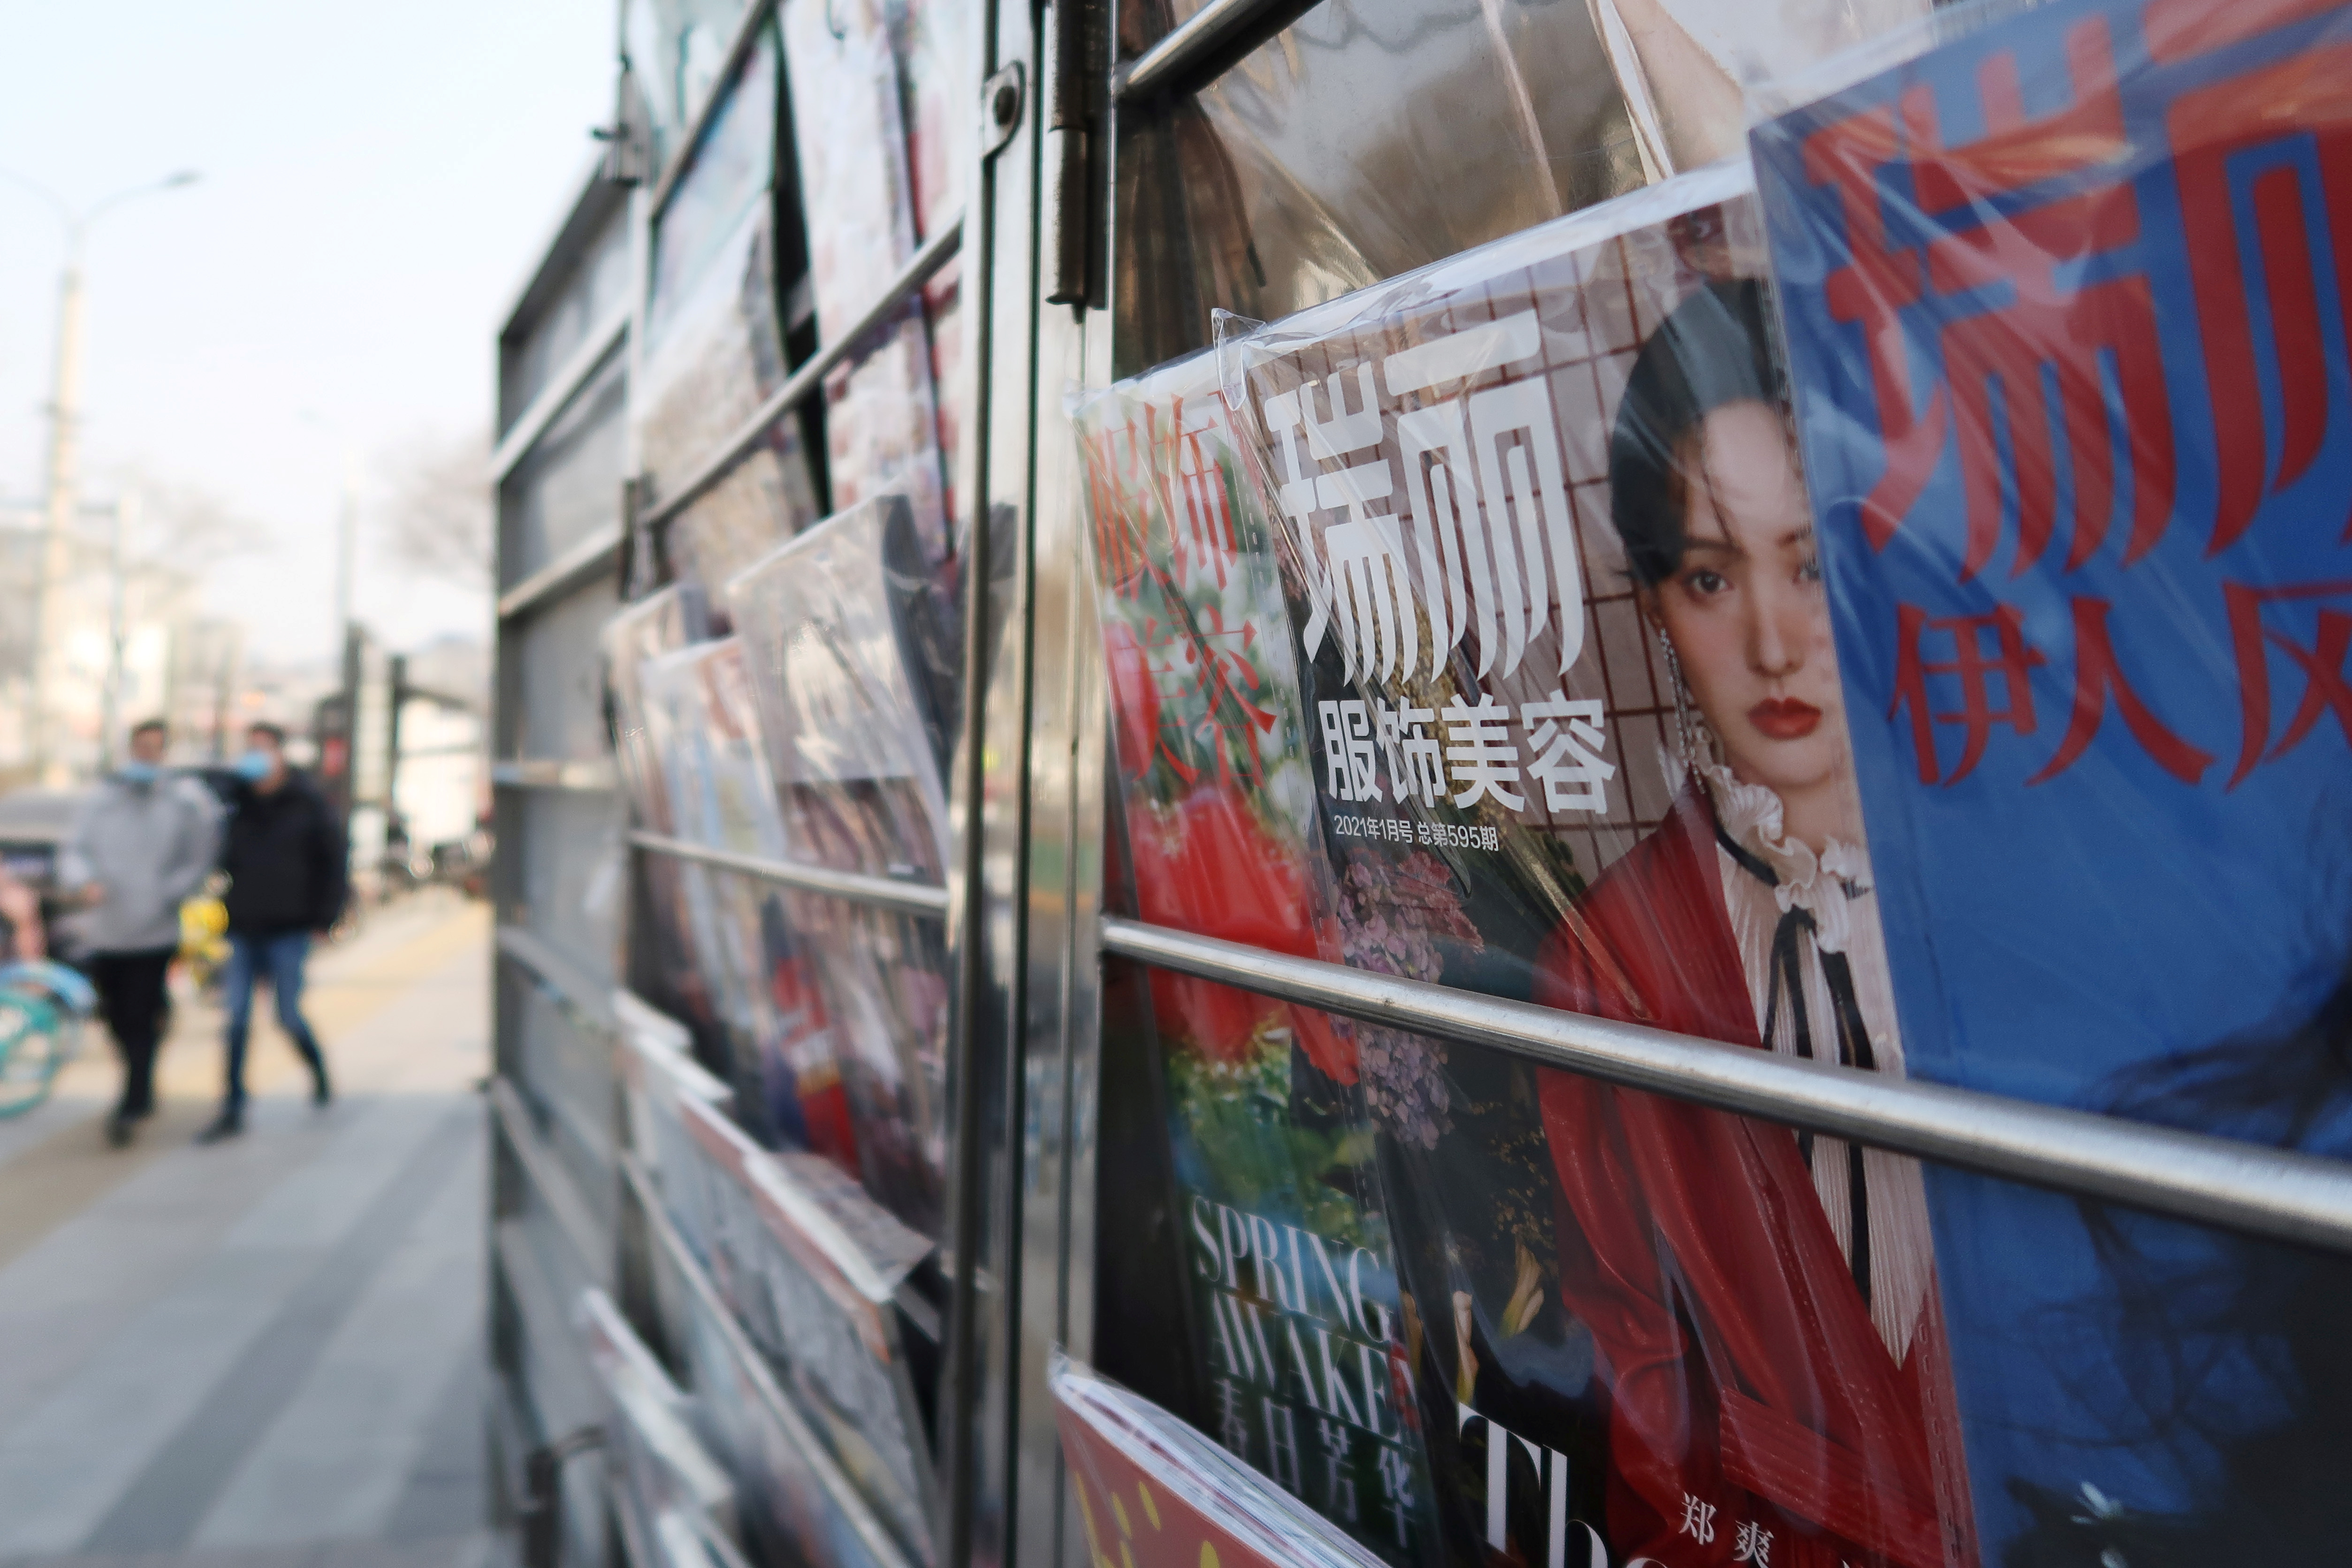 Chinese actress Zheng Shuang is seen on a cover of a fashion magazine at a newsstand in Beijing